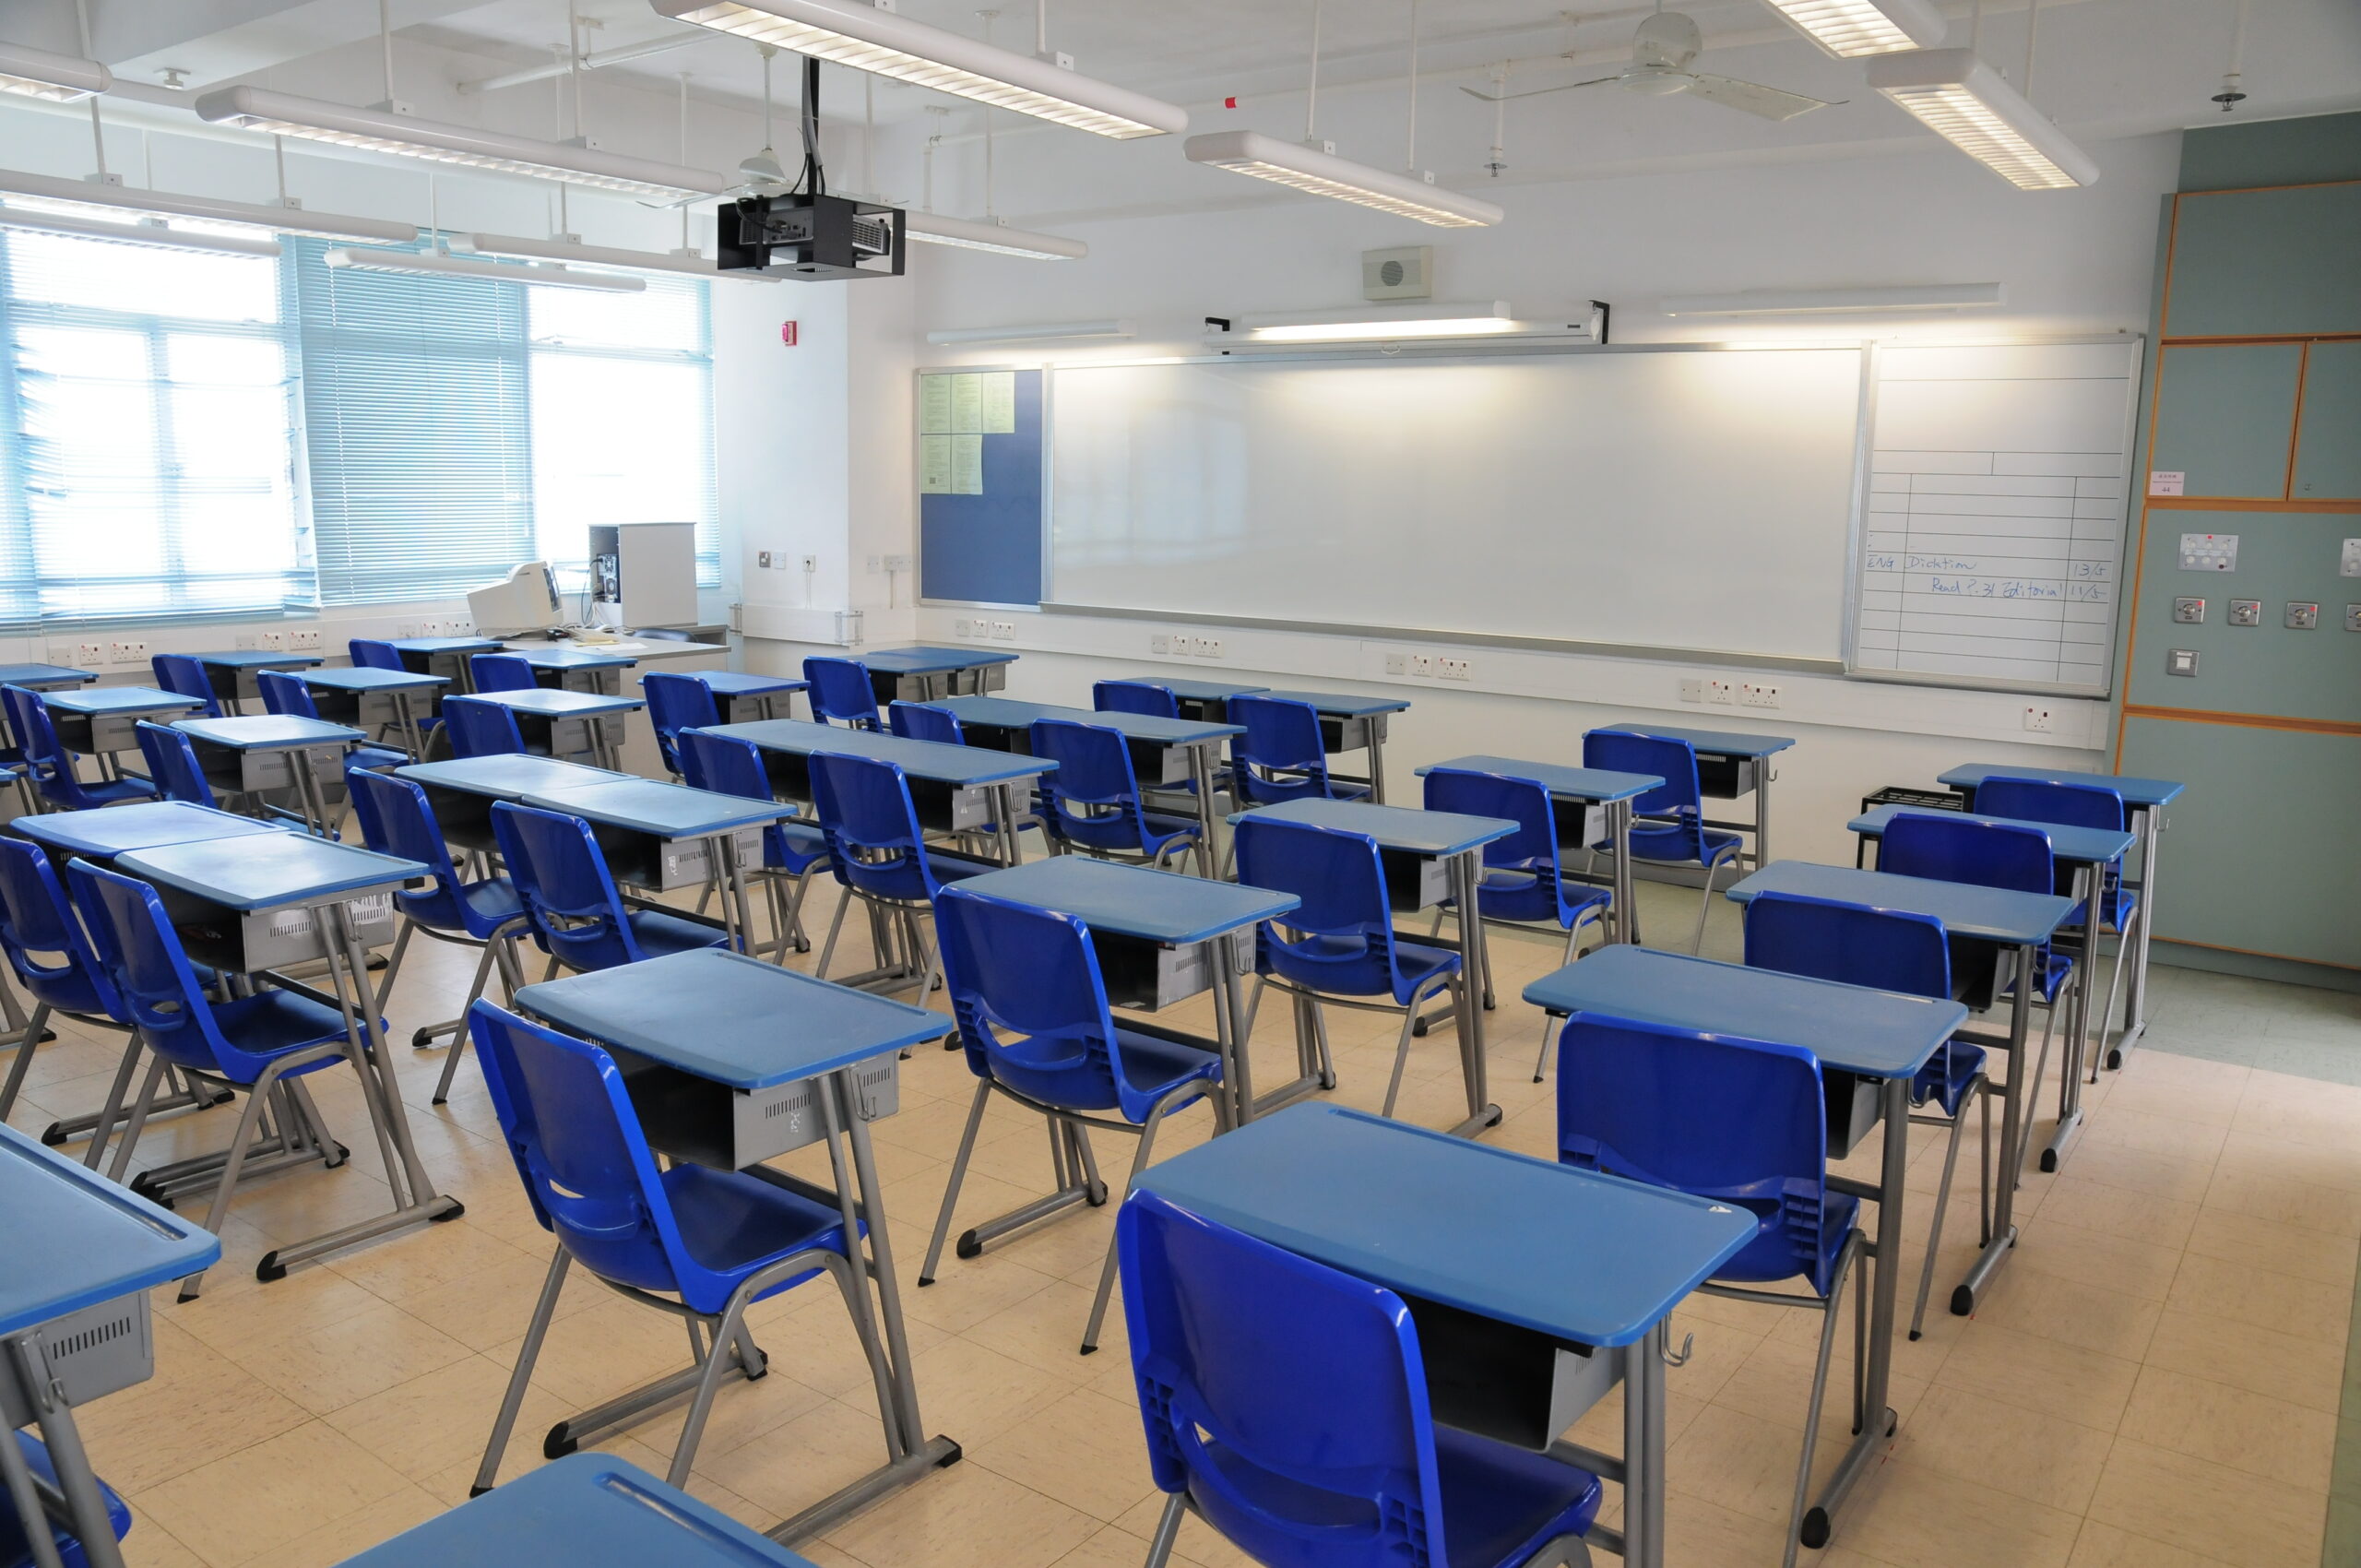 A classroom with blue chairs and desks in it